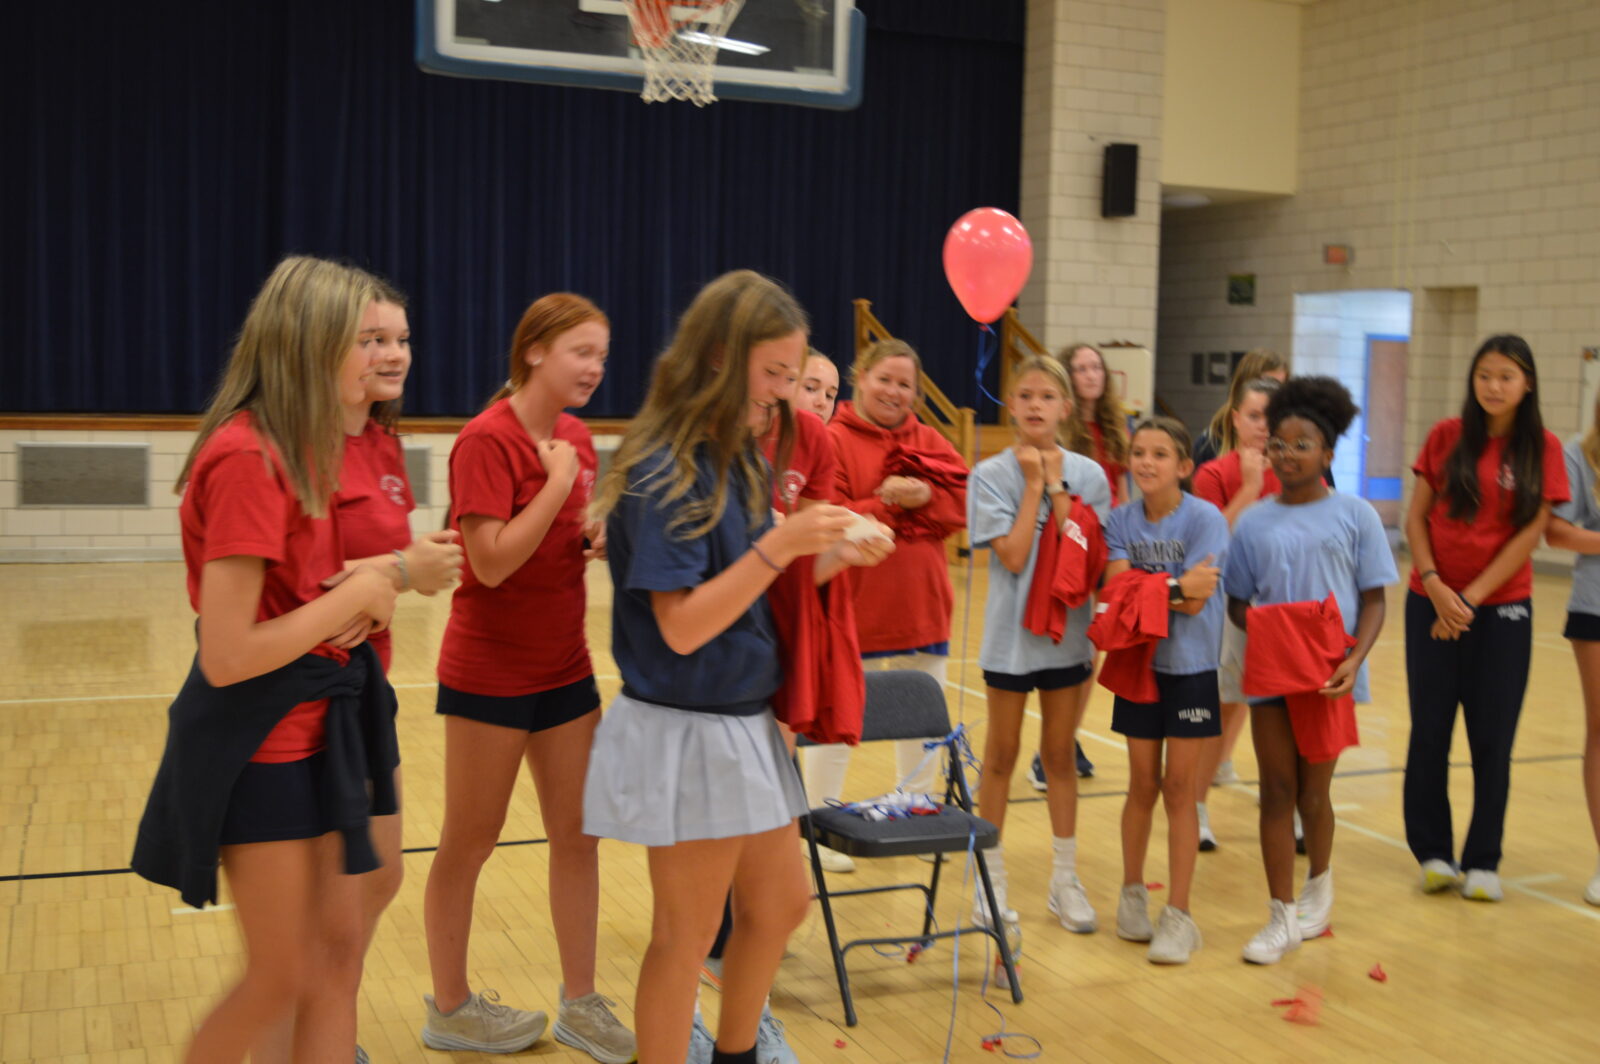 New Middle School House Members Inducted